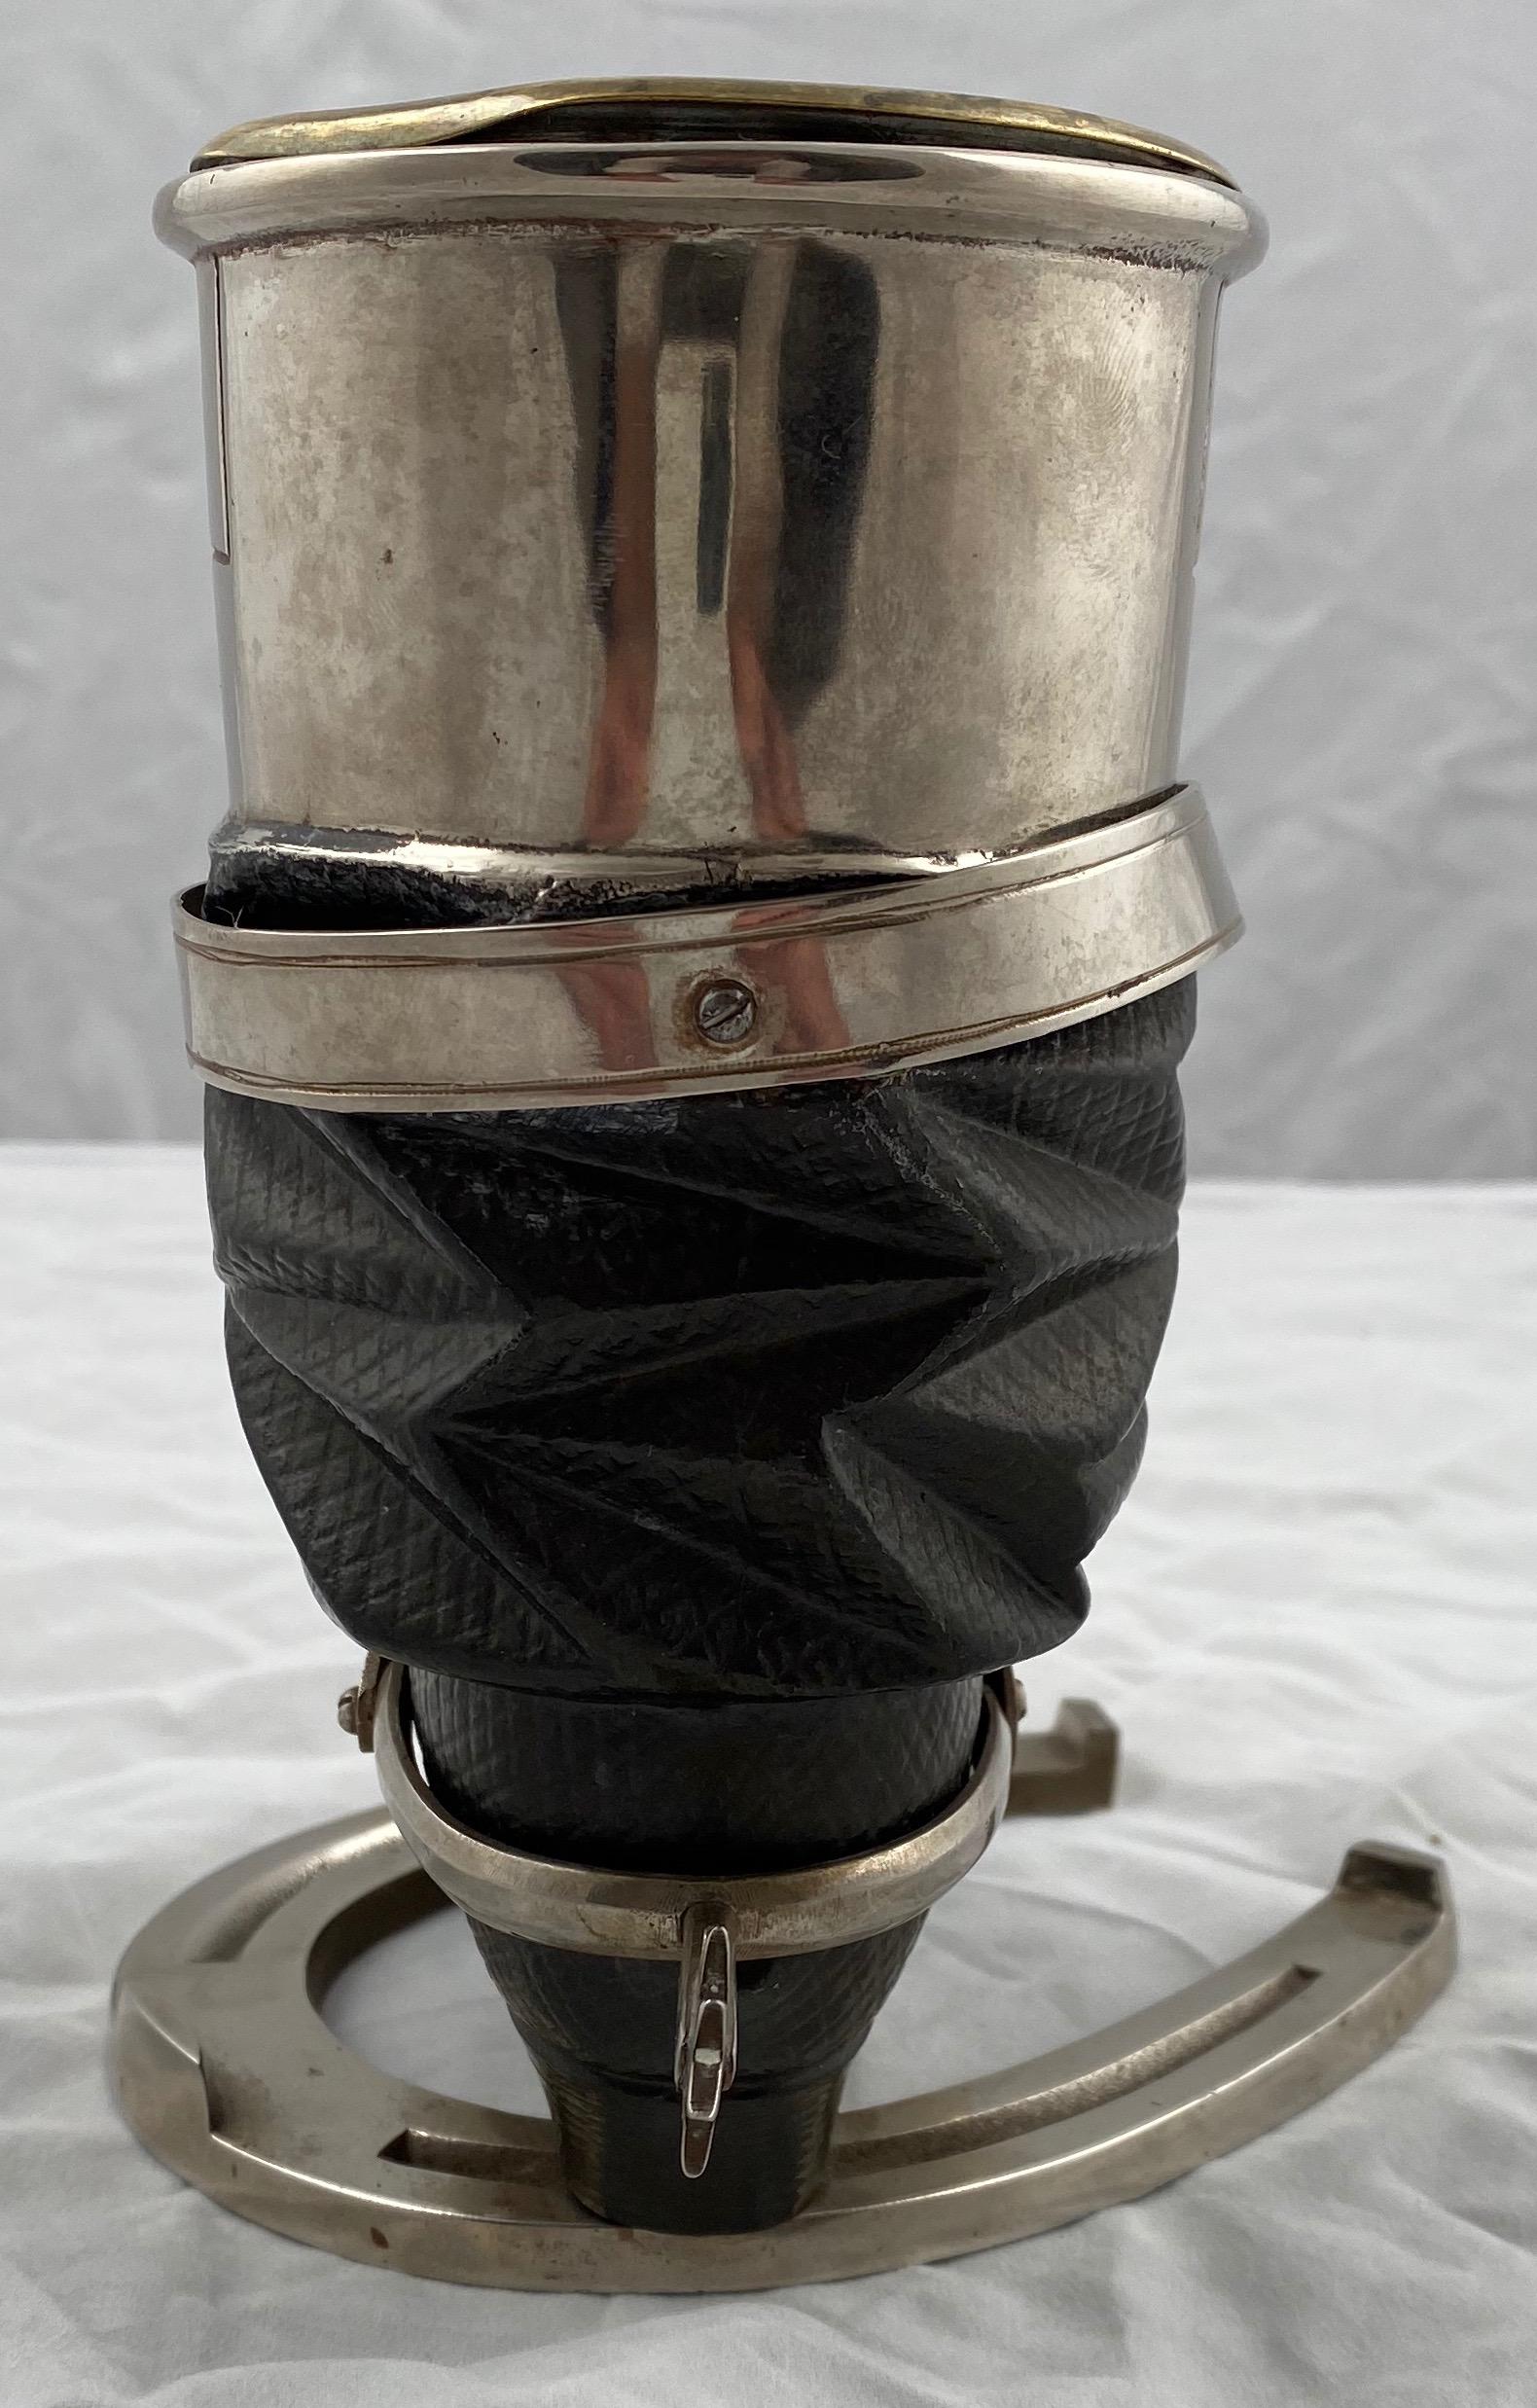 A small wonderful penholder. Made of bronze and steel, late 19th century. The casted boot is standing on a horseshoe and is of absolute top quality.